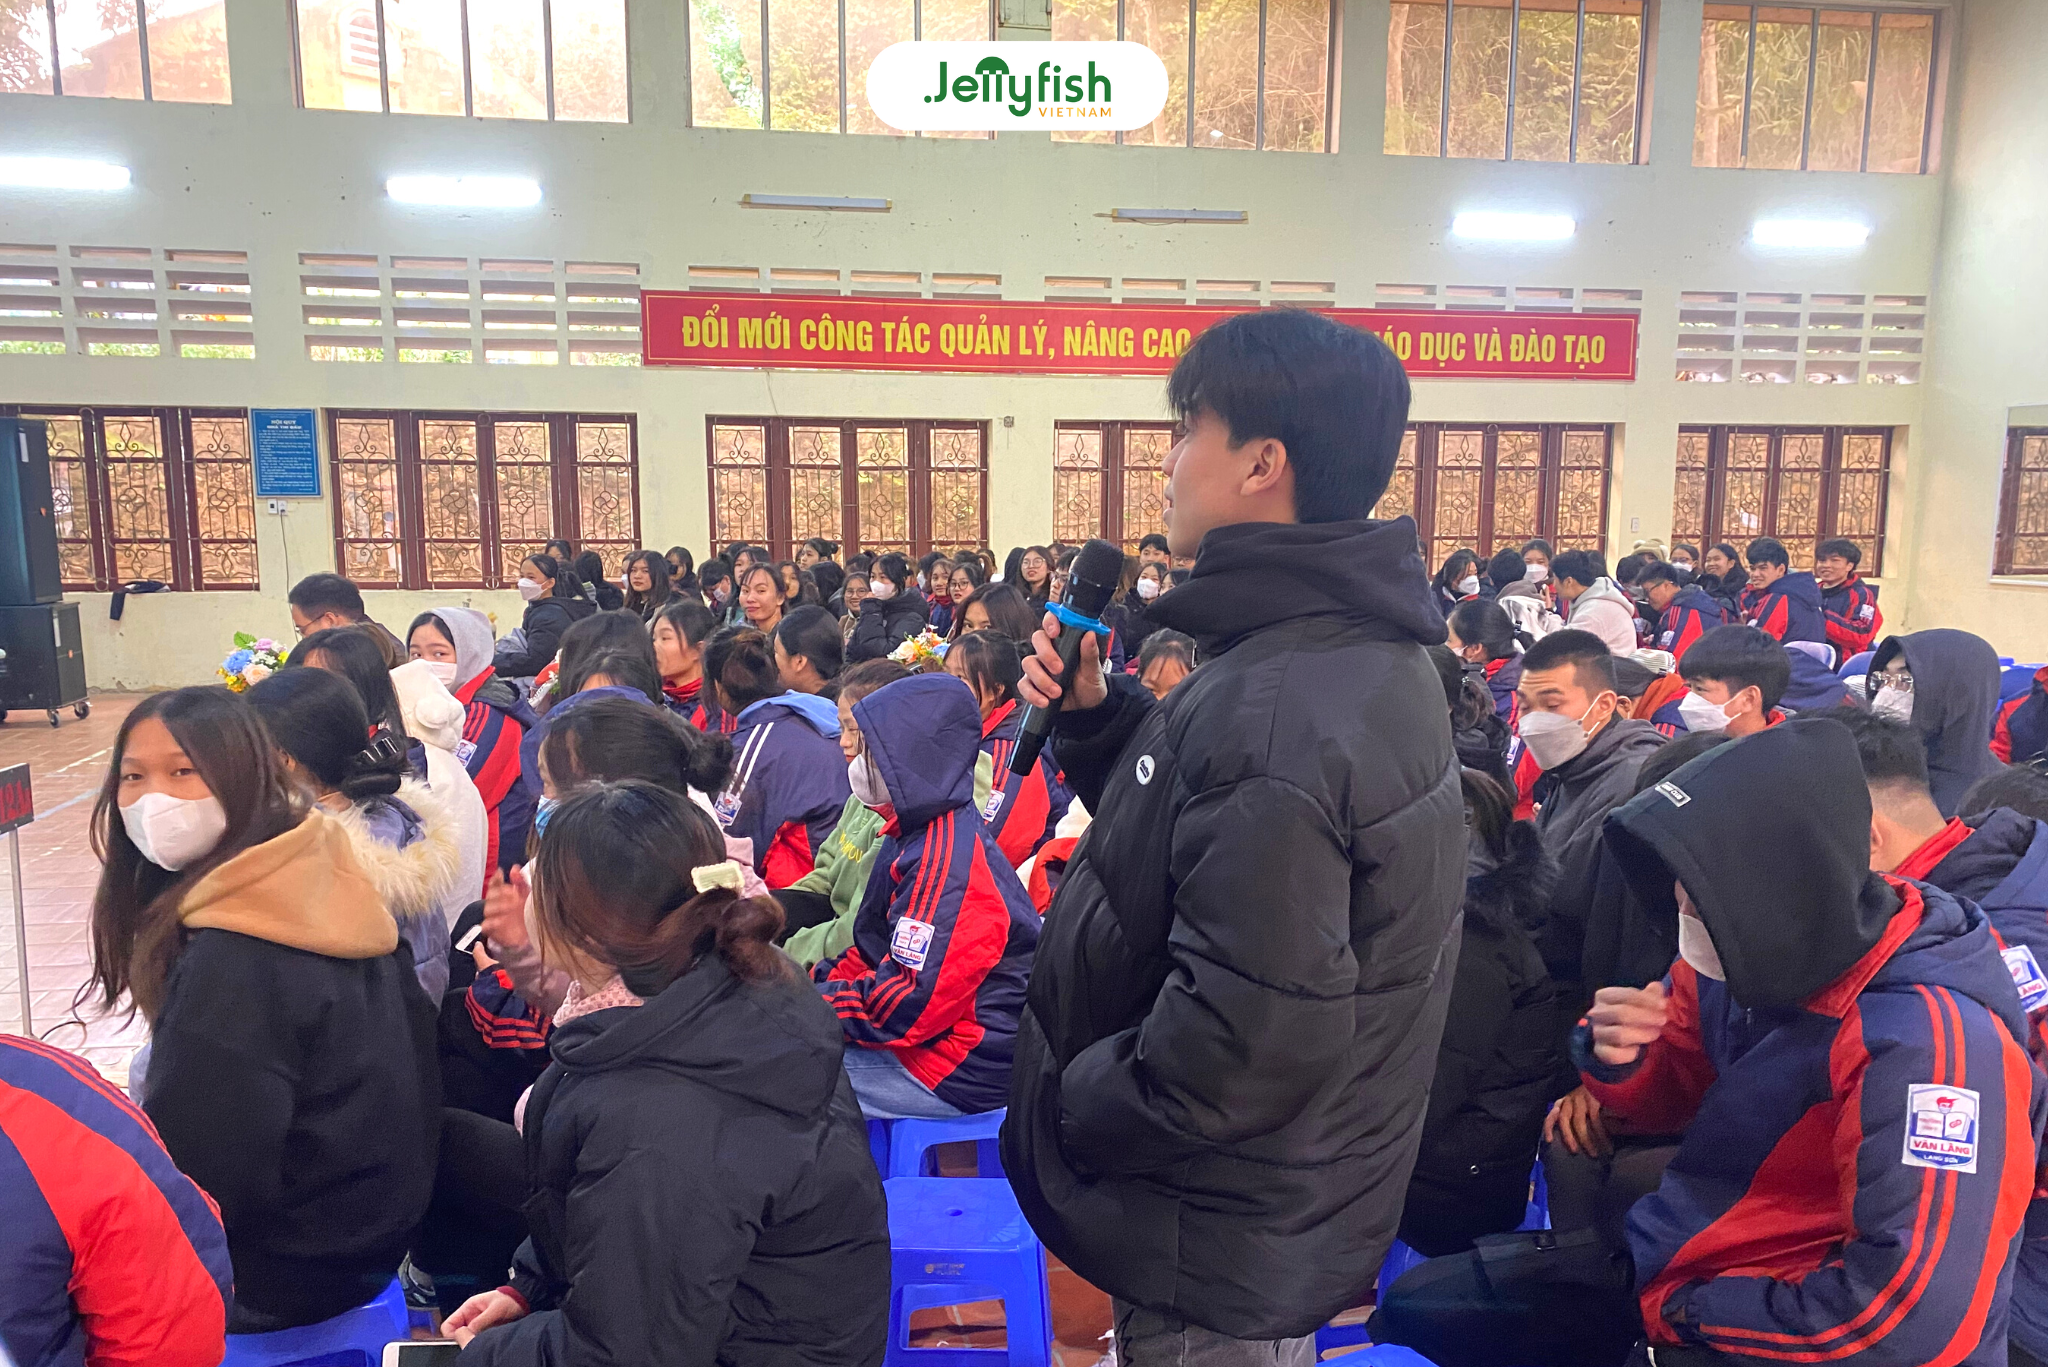 Students excitedly asked questions for Jellyfish Vietnam